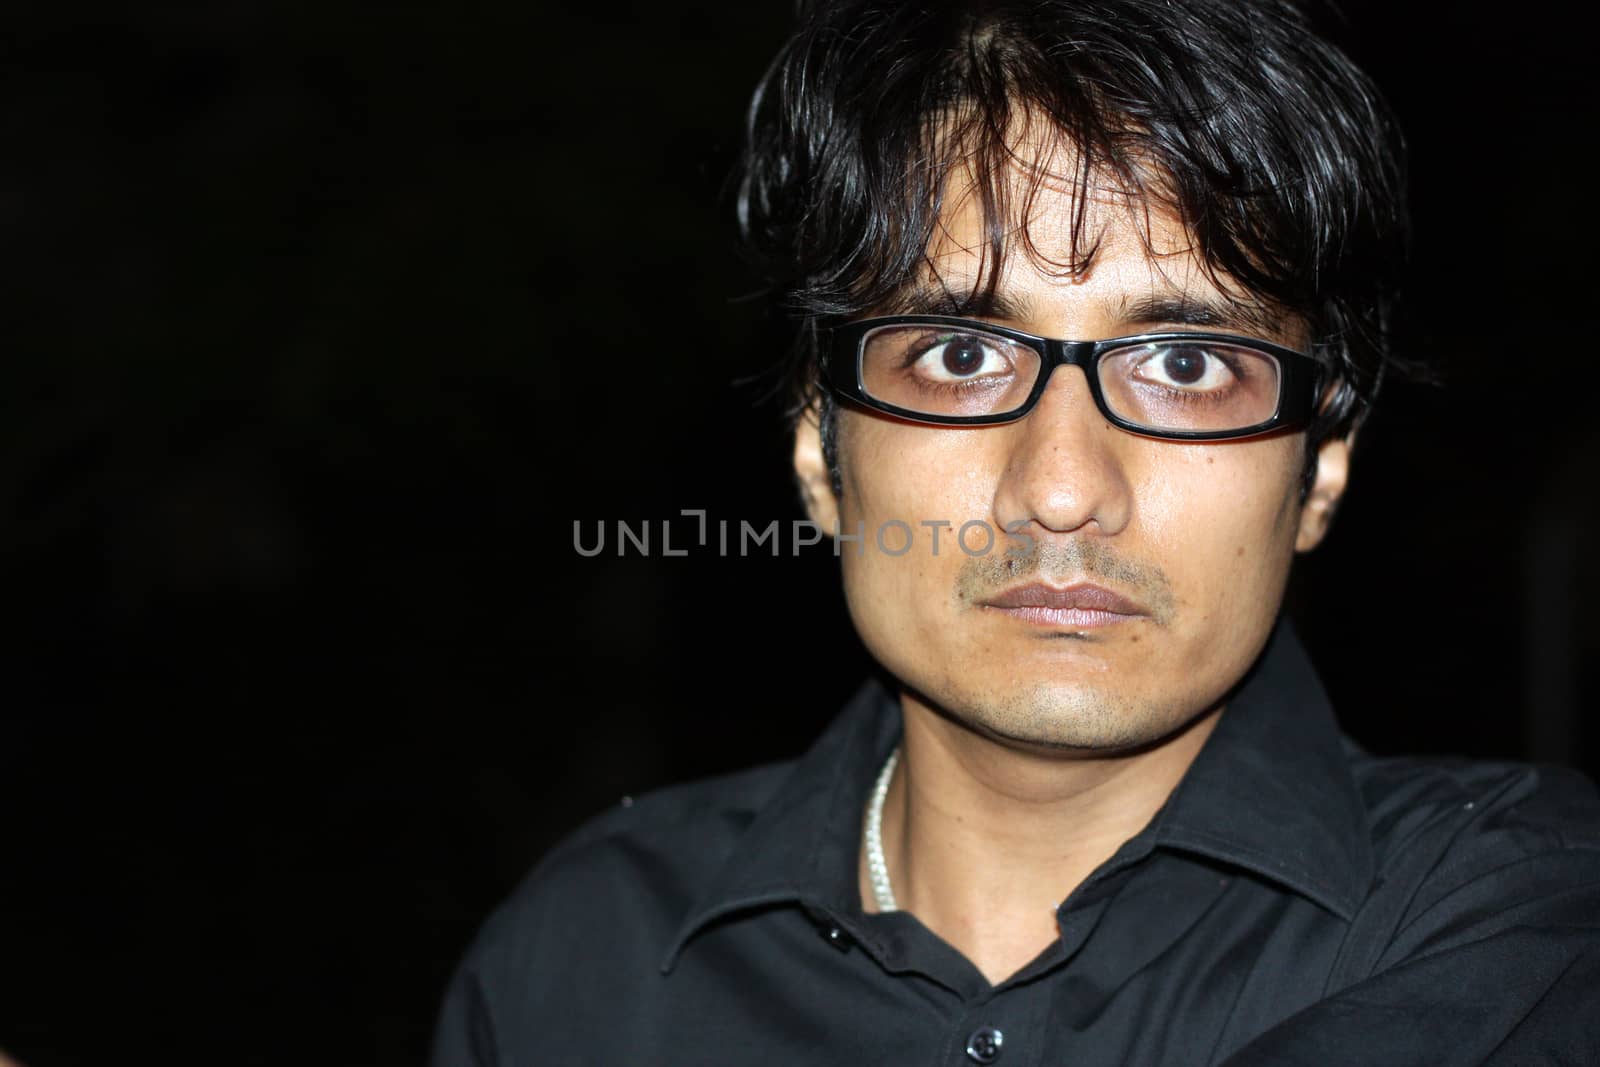 A portrait of an angry Indian man wearing glasses